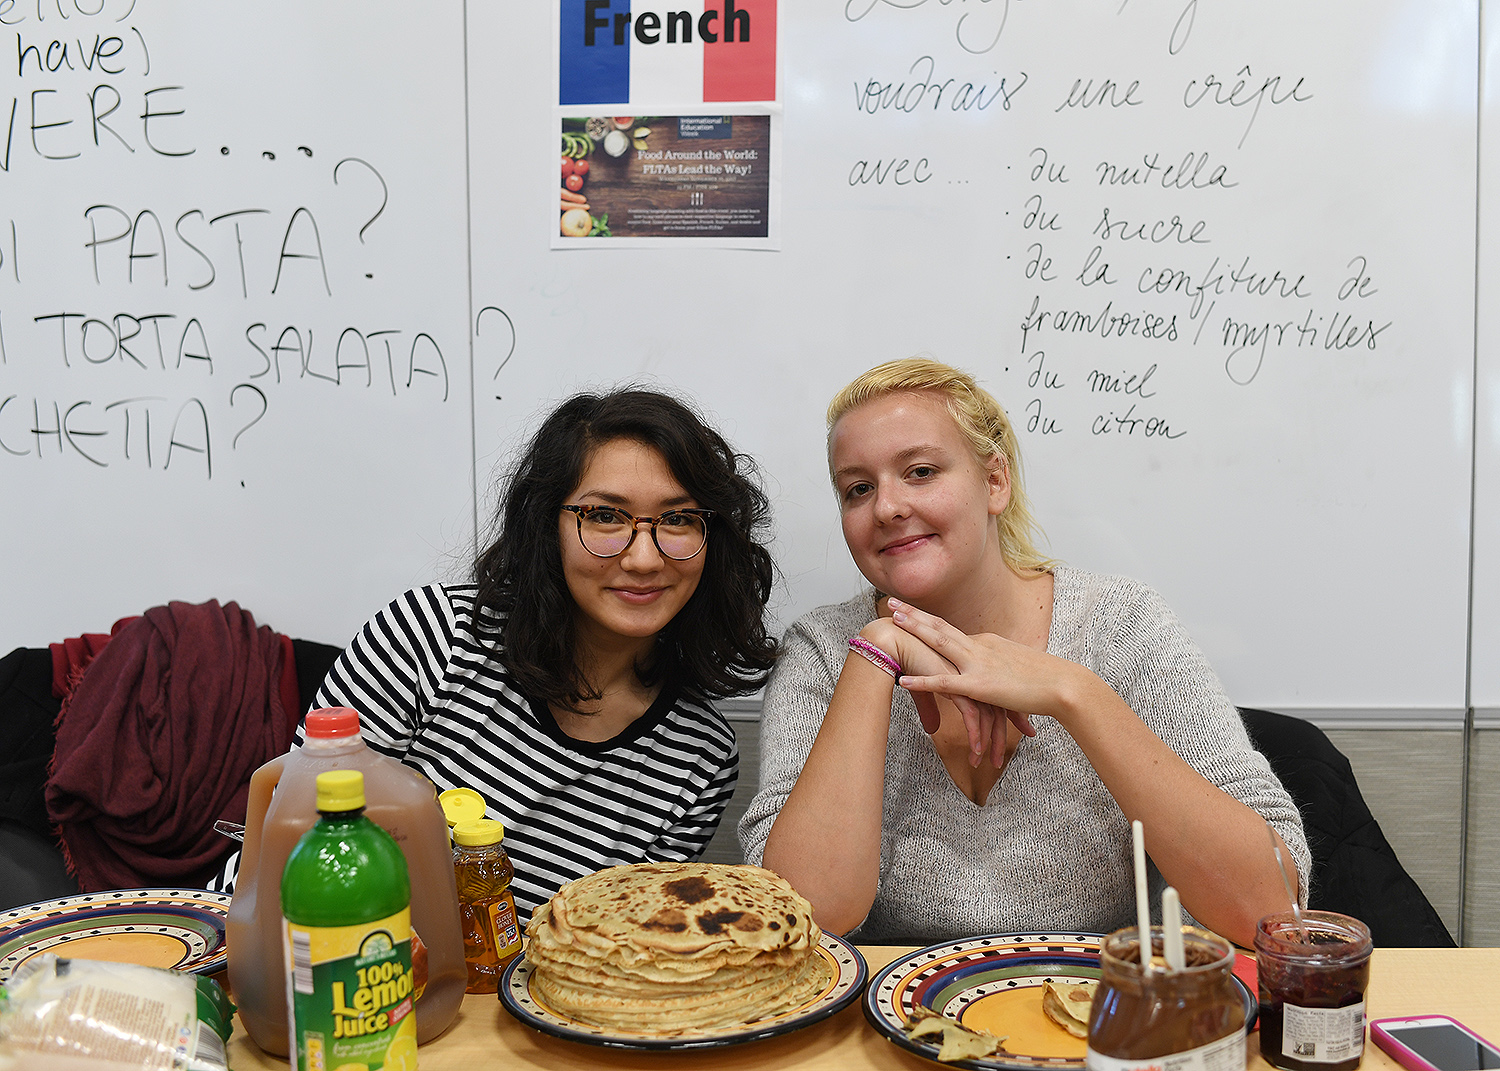 Participants learned how to say phrases in a respective language (Spanish, French, Italian and Arabic) in order to receive the food. Representatives of France served crepes. 